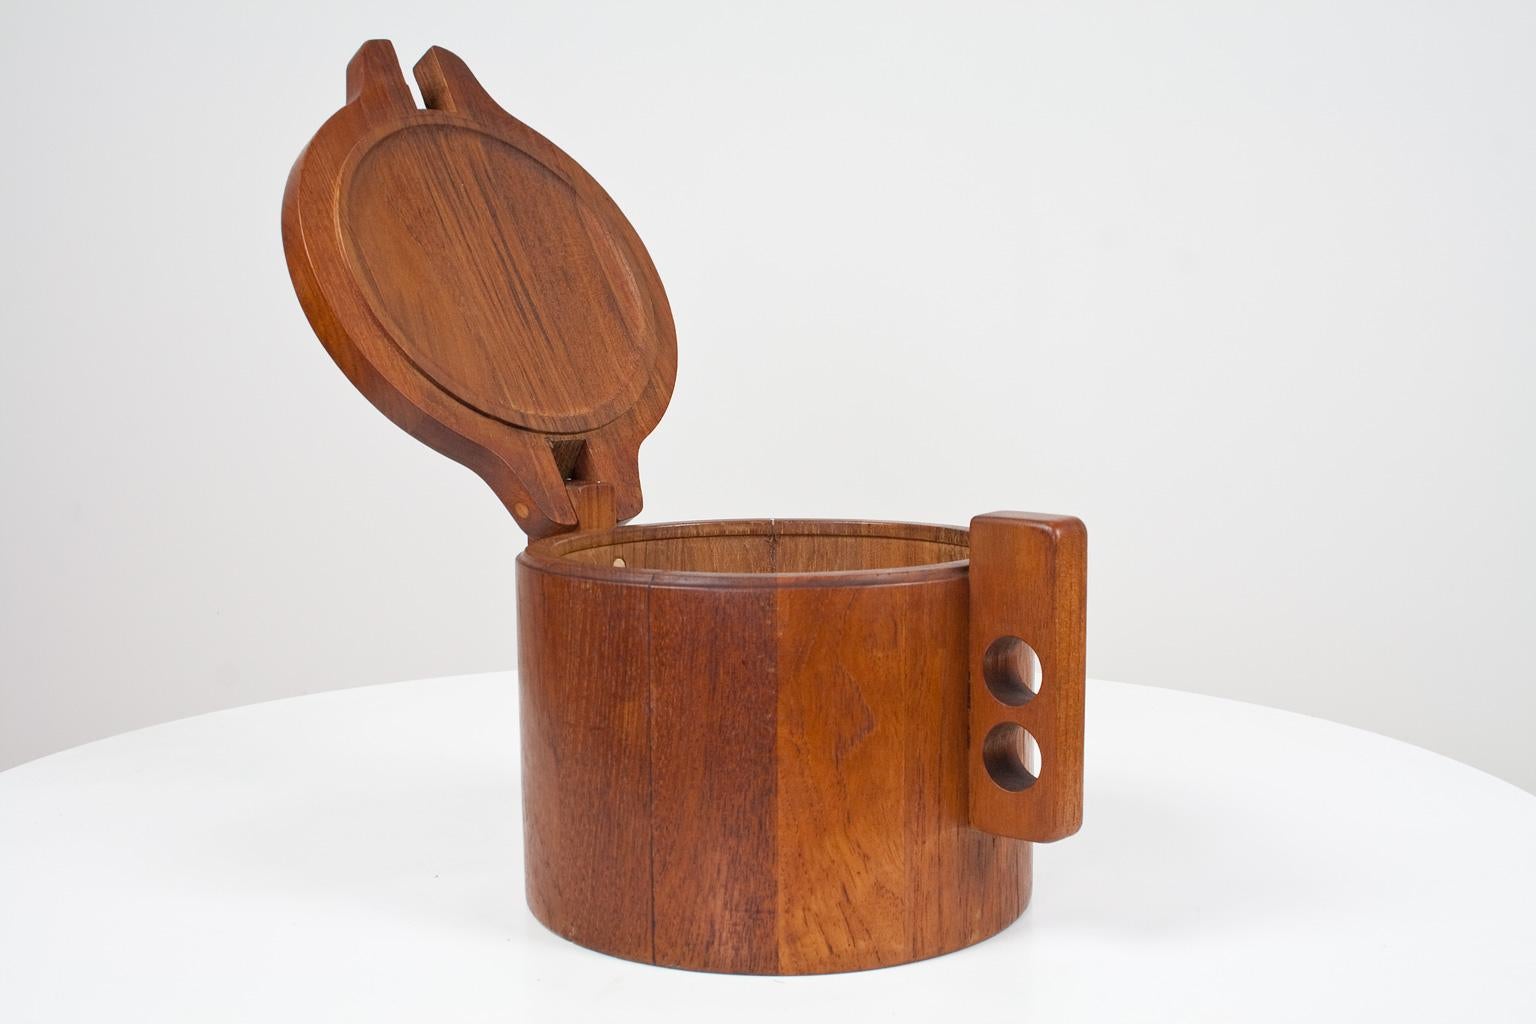 Large solid teak wooden ice bucket or ice bowl, designed by Danish artist Birgit Krogh in 1979 for Woodline Denmark. Woodline commissioned Krogh in 1979 for a special collection in teak such as platters, bowls and this ice bucket. Brand present on